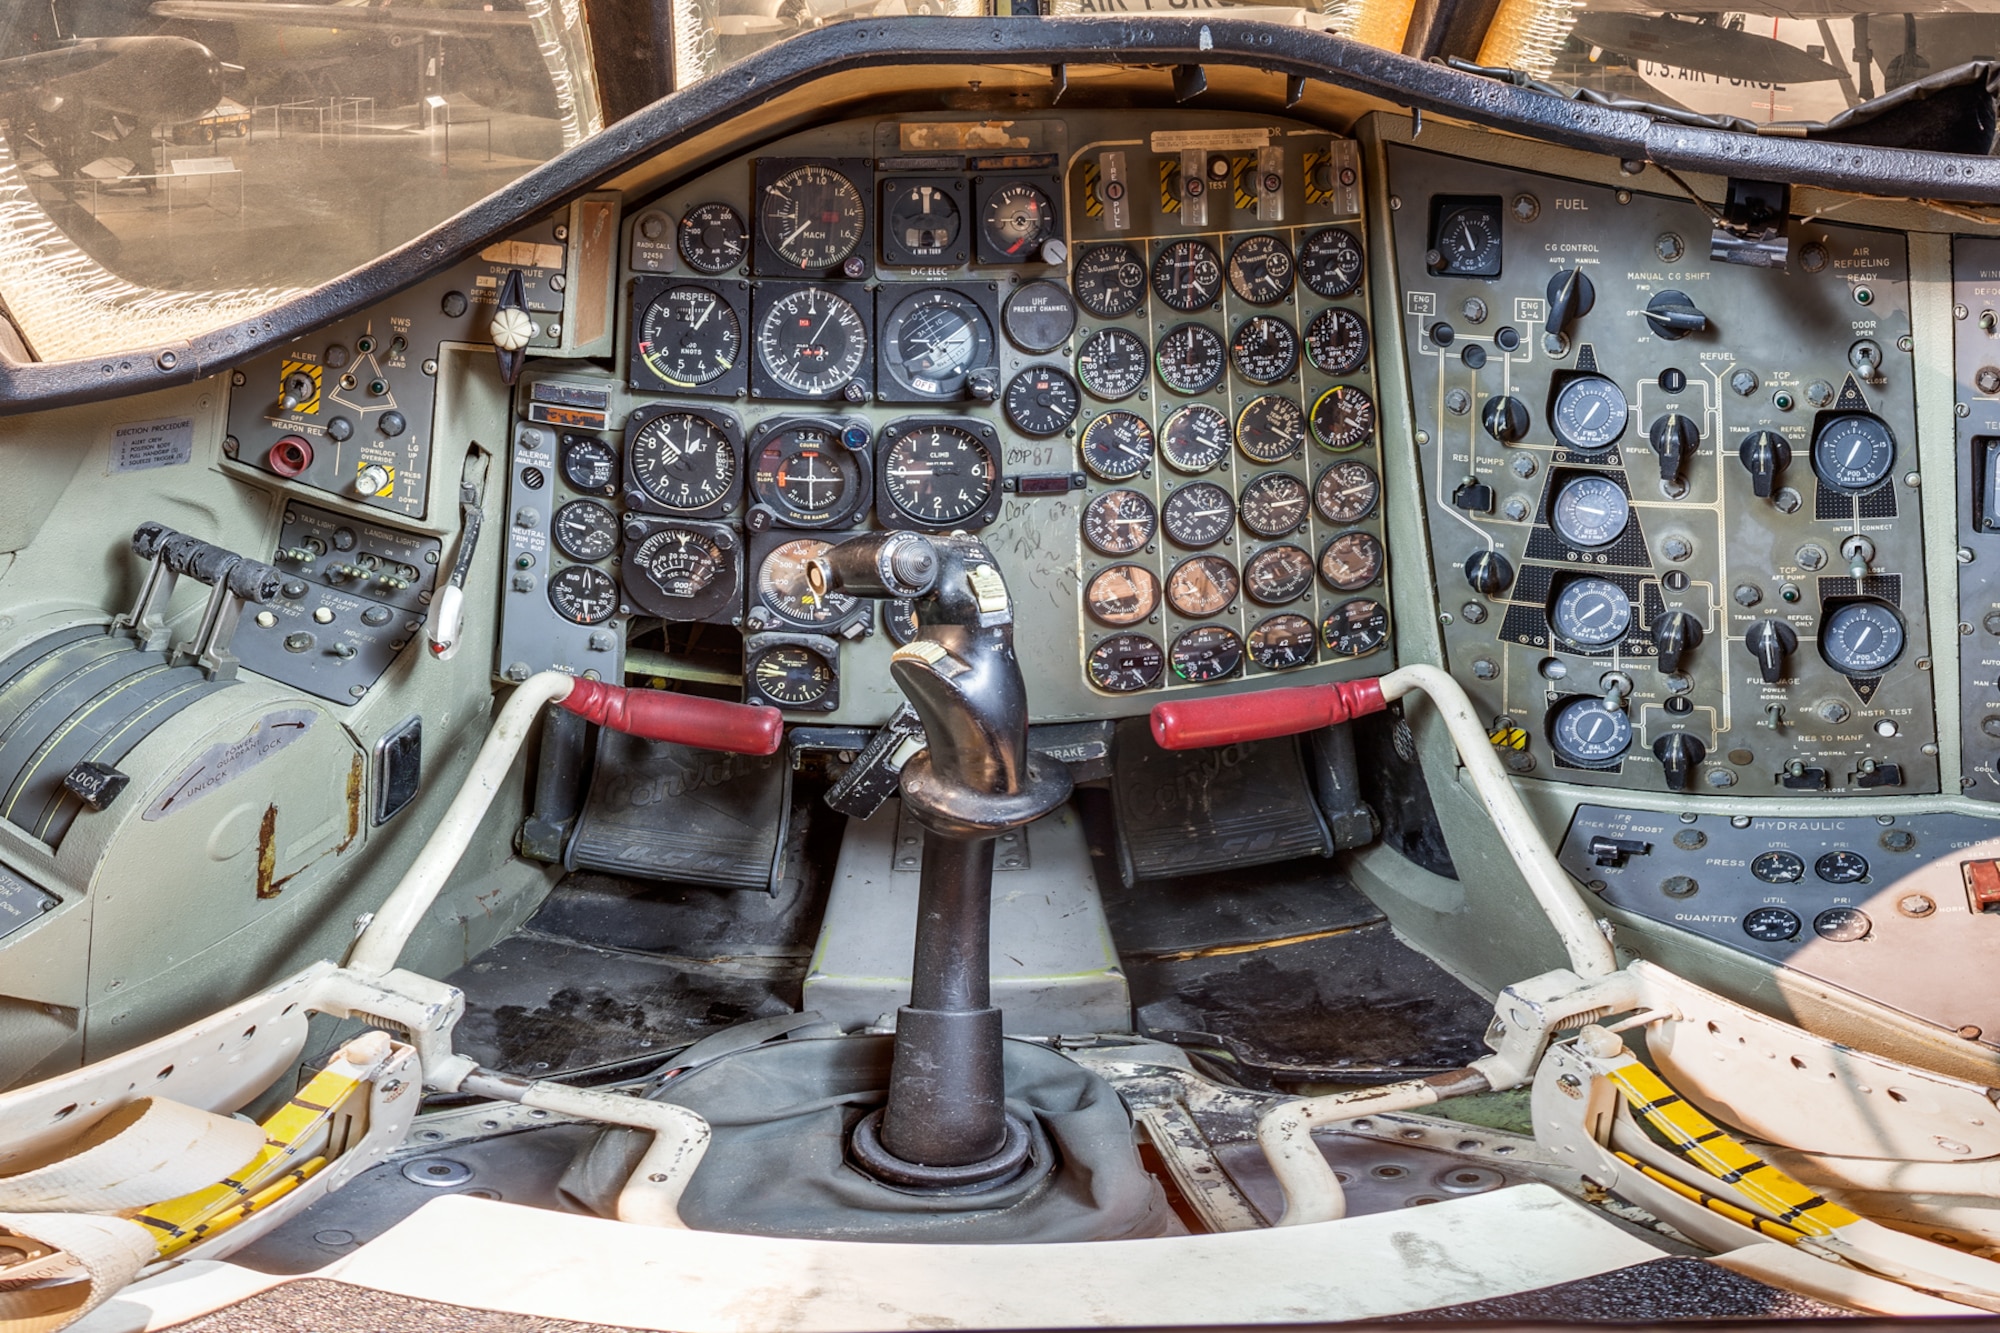 DAYTON, Ohio -- Convair B-58A Hustler pilot cockpit view in the Cold War Gallery at the National Museum of the United States Air Force.(Photo courtesy of Lyle Jansma, Aerocapture Images)  